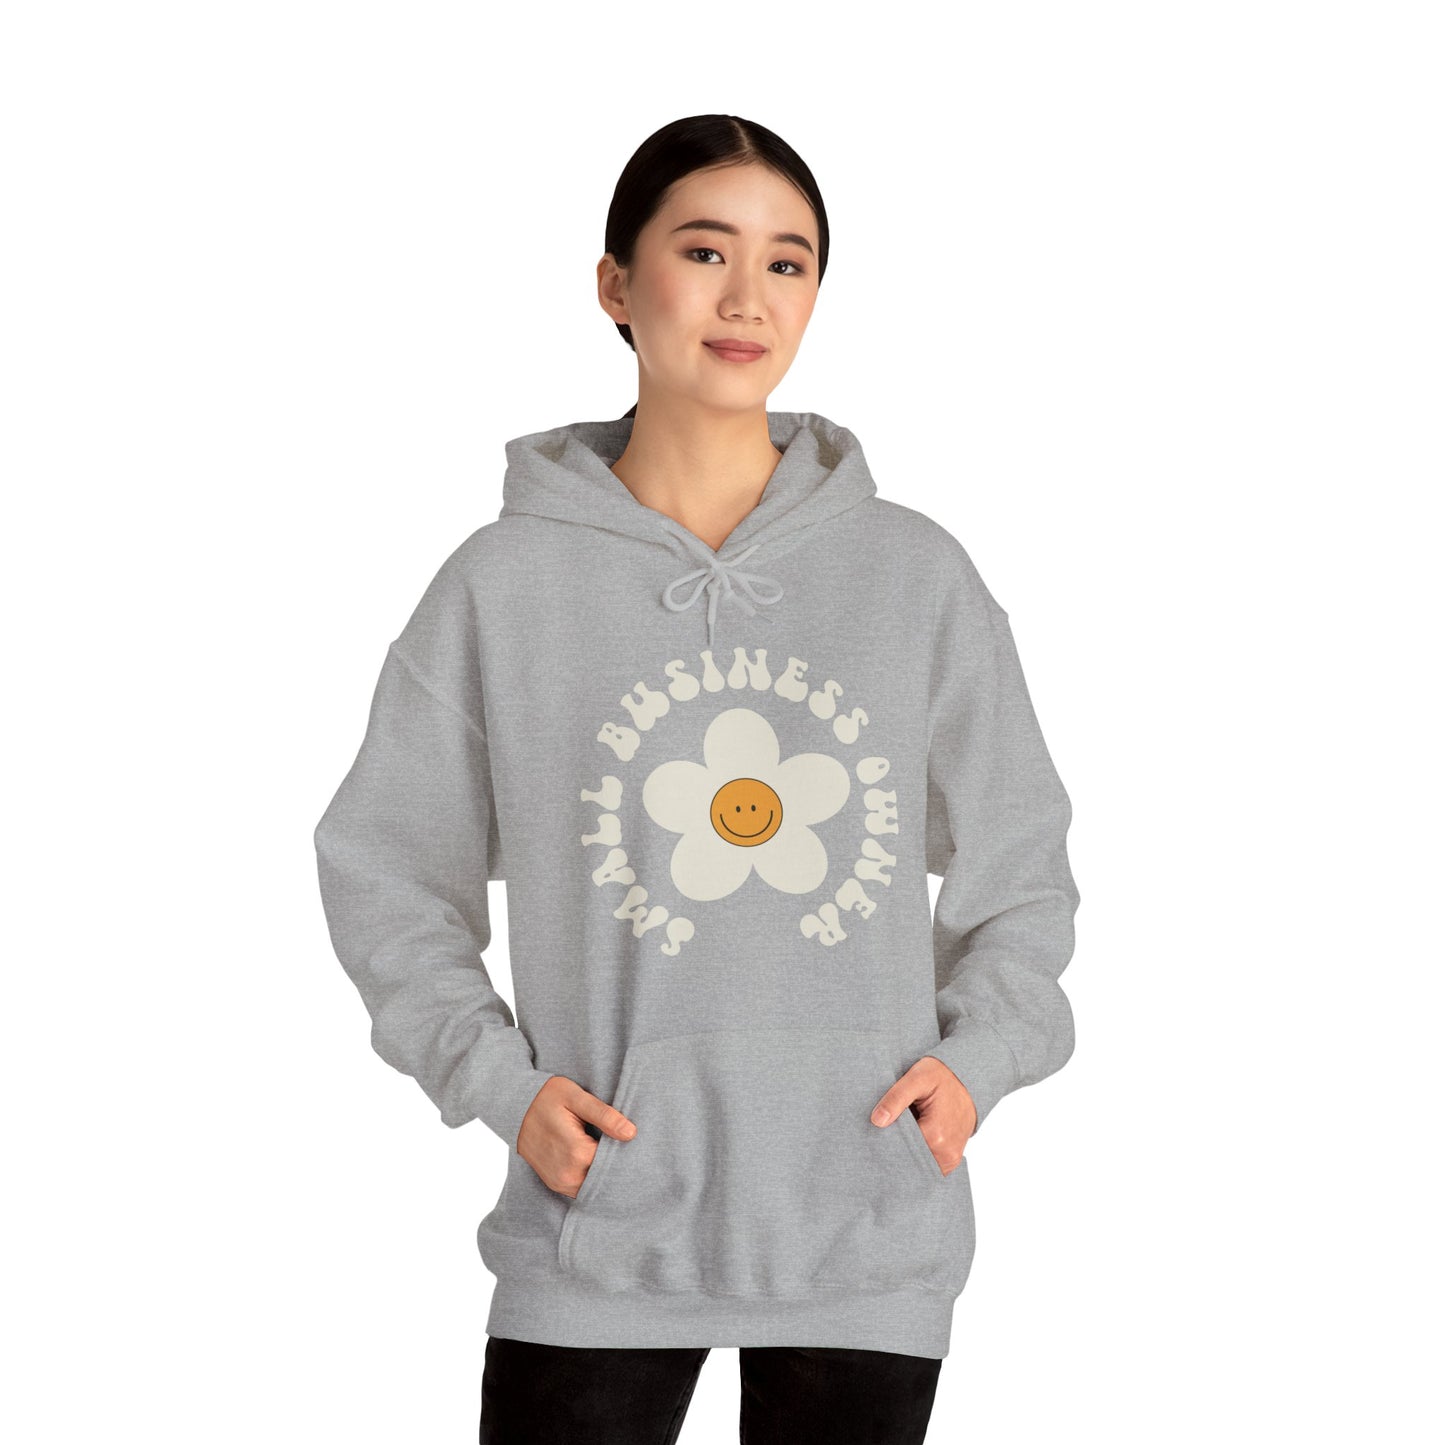 Small Business Owner Hooded Sweatshirt